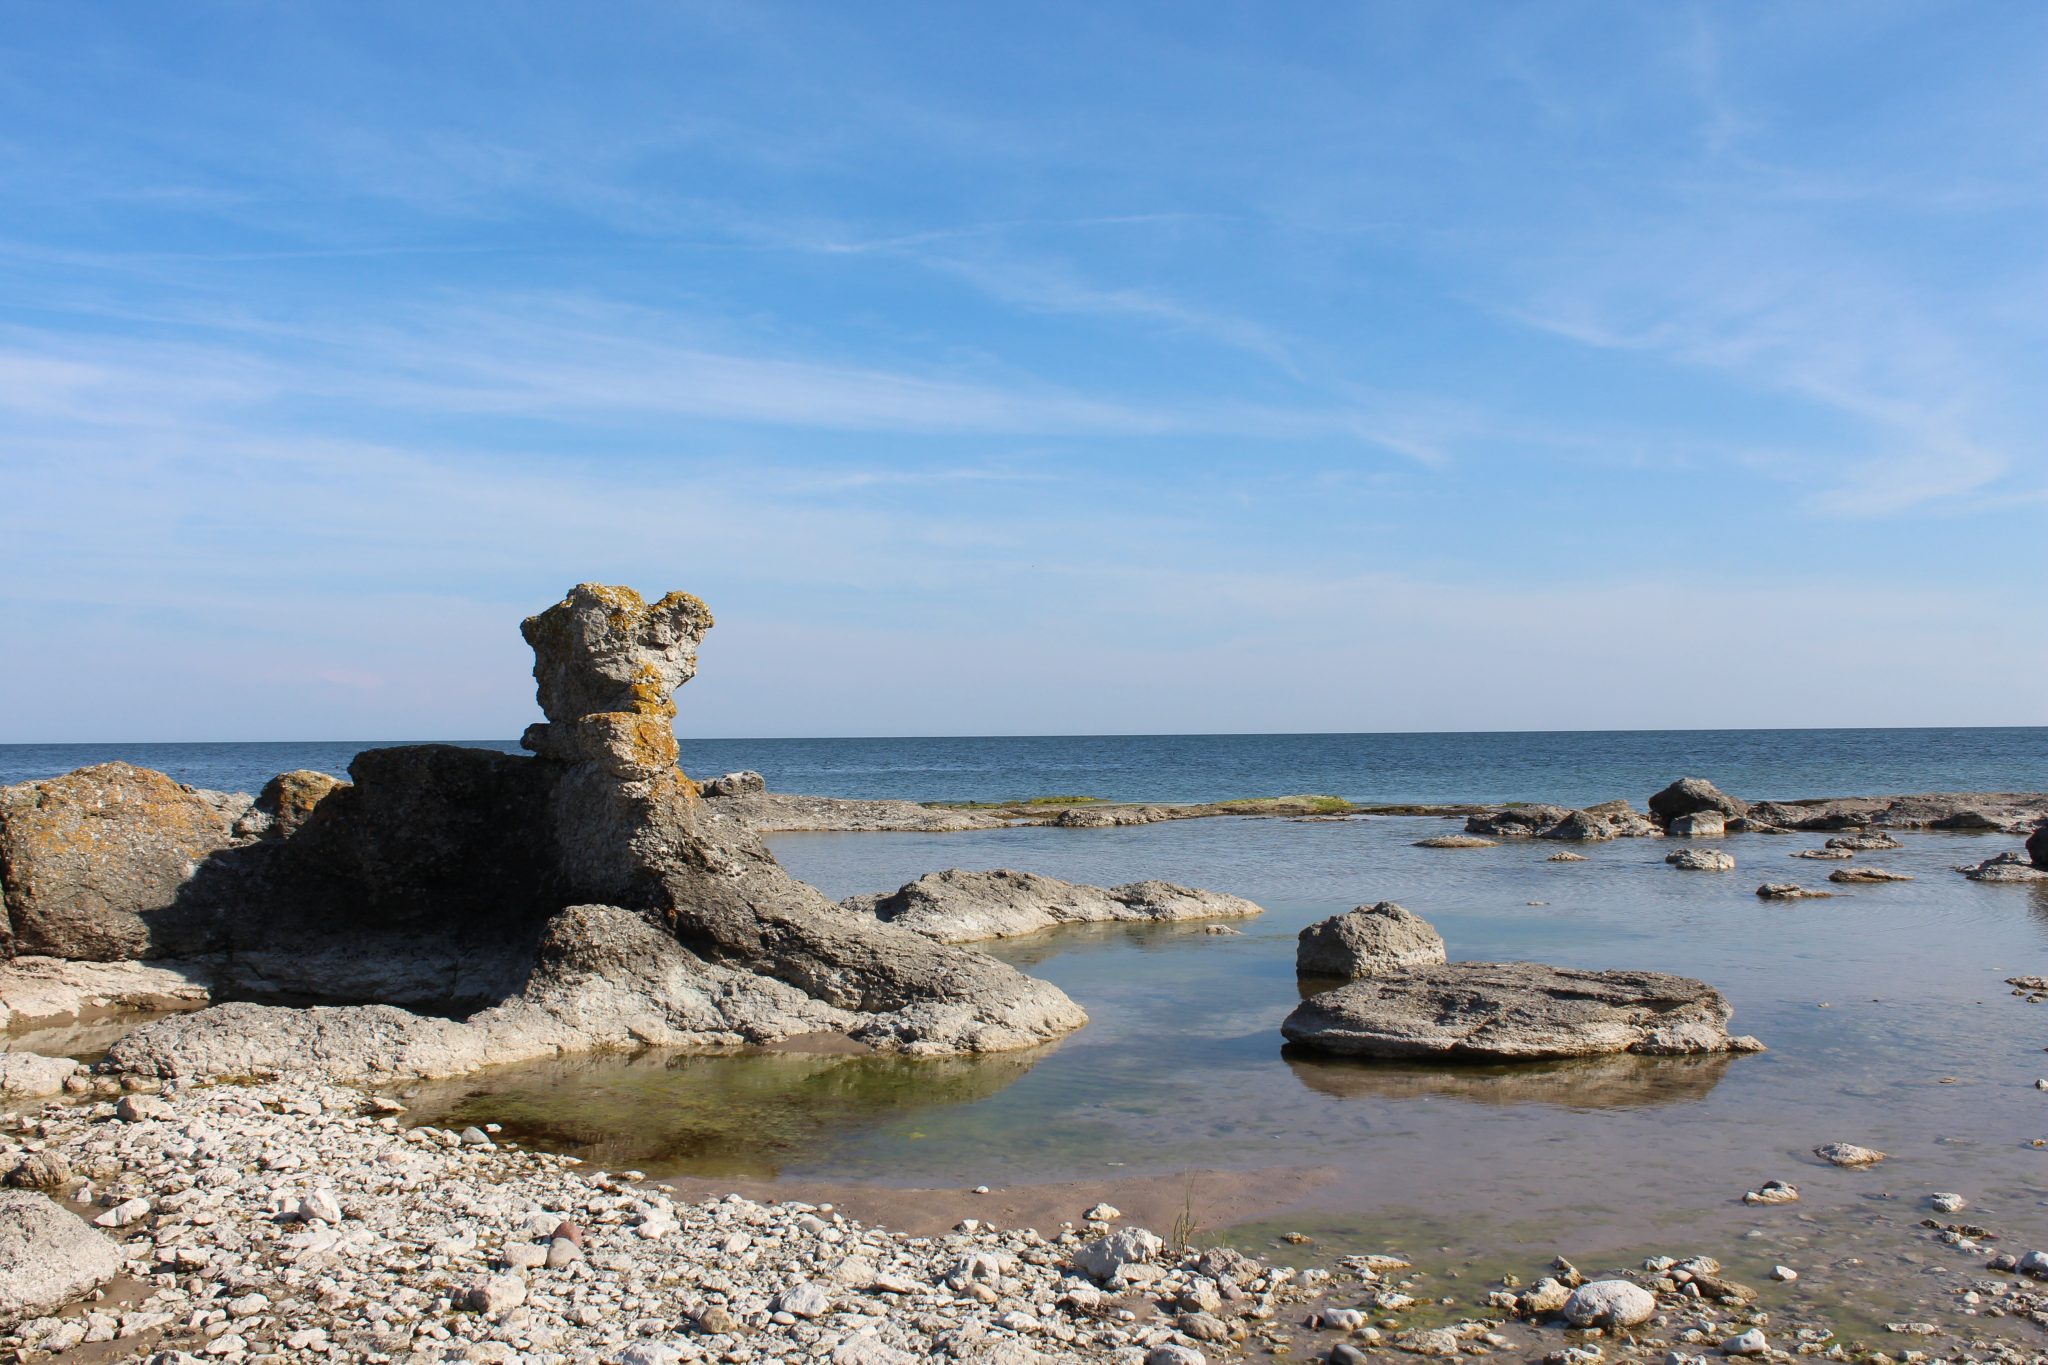 Up at the most northern tip of Fårö.